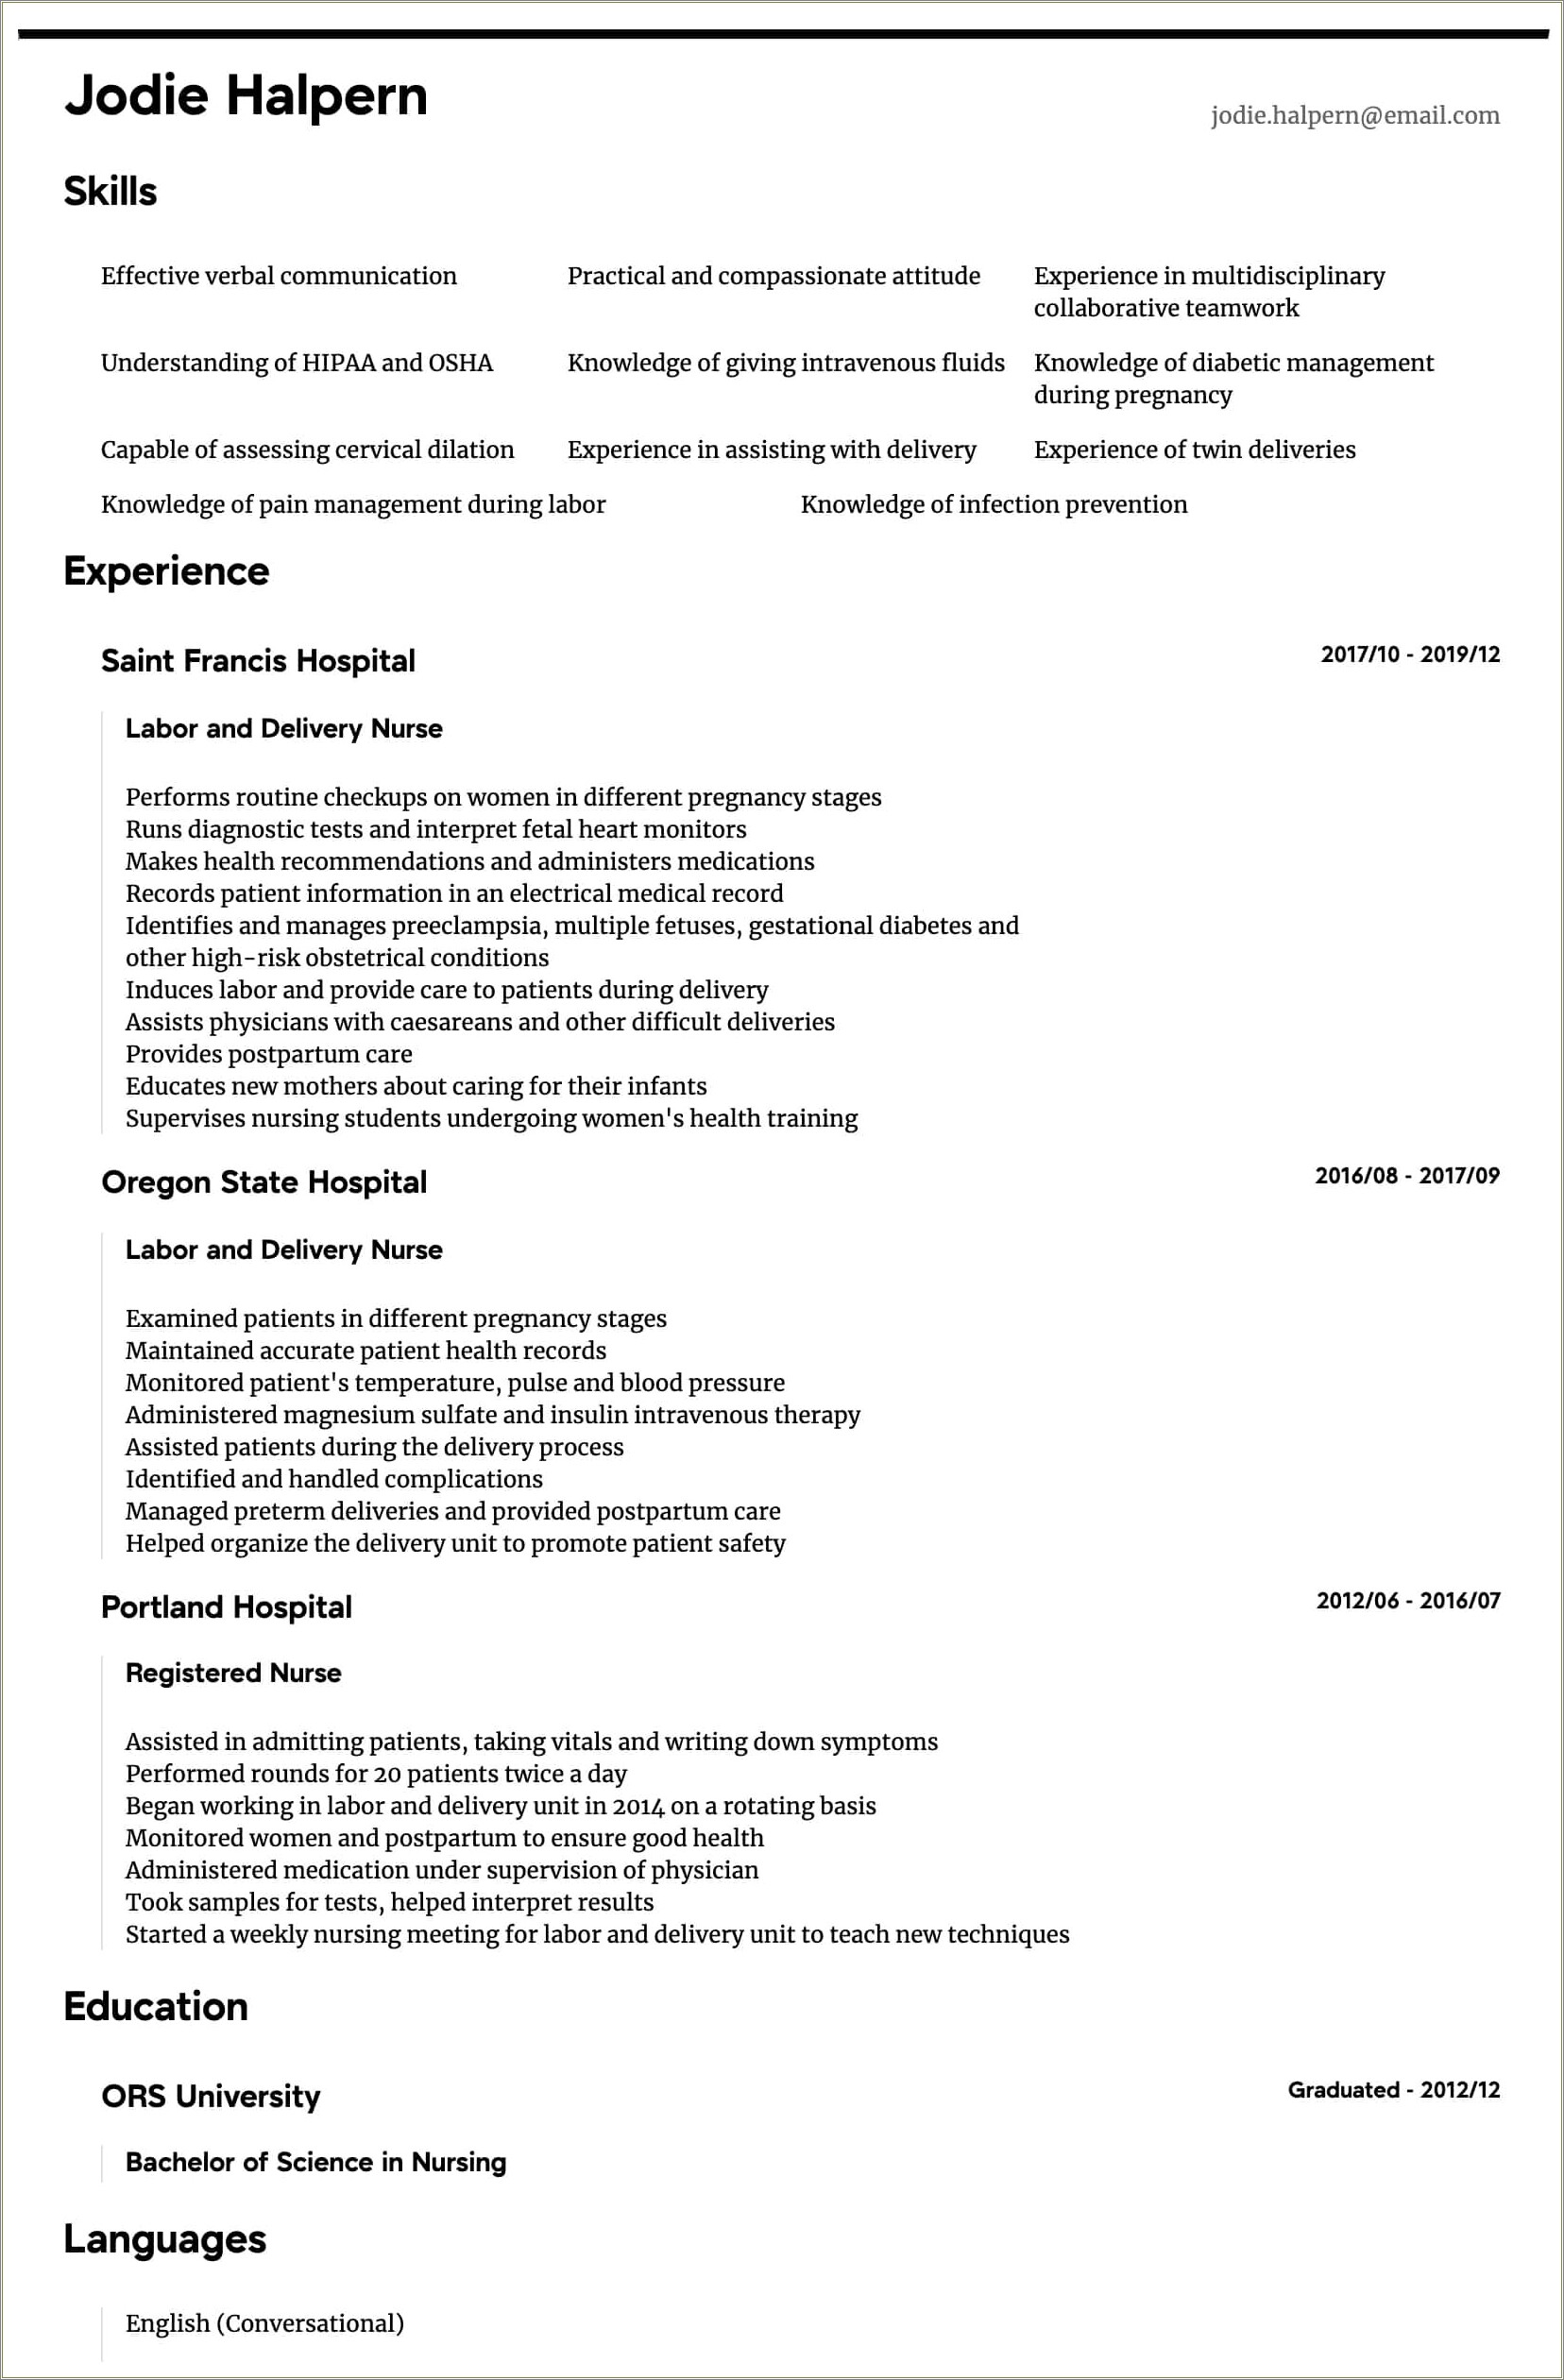 Resume For A Newer Nurse With Little Experience